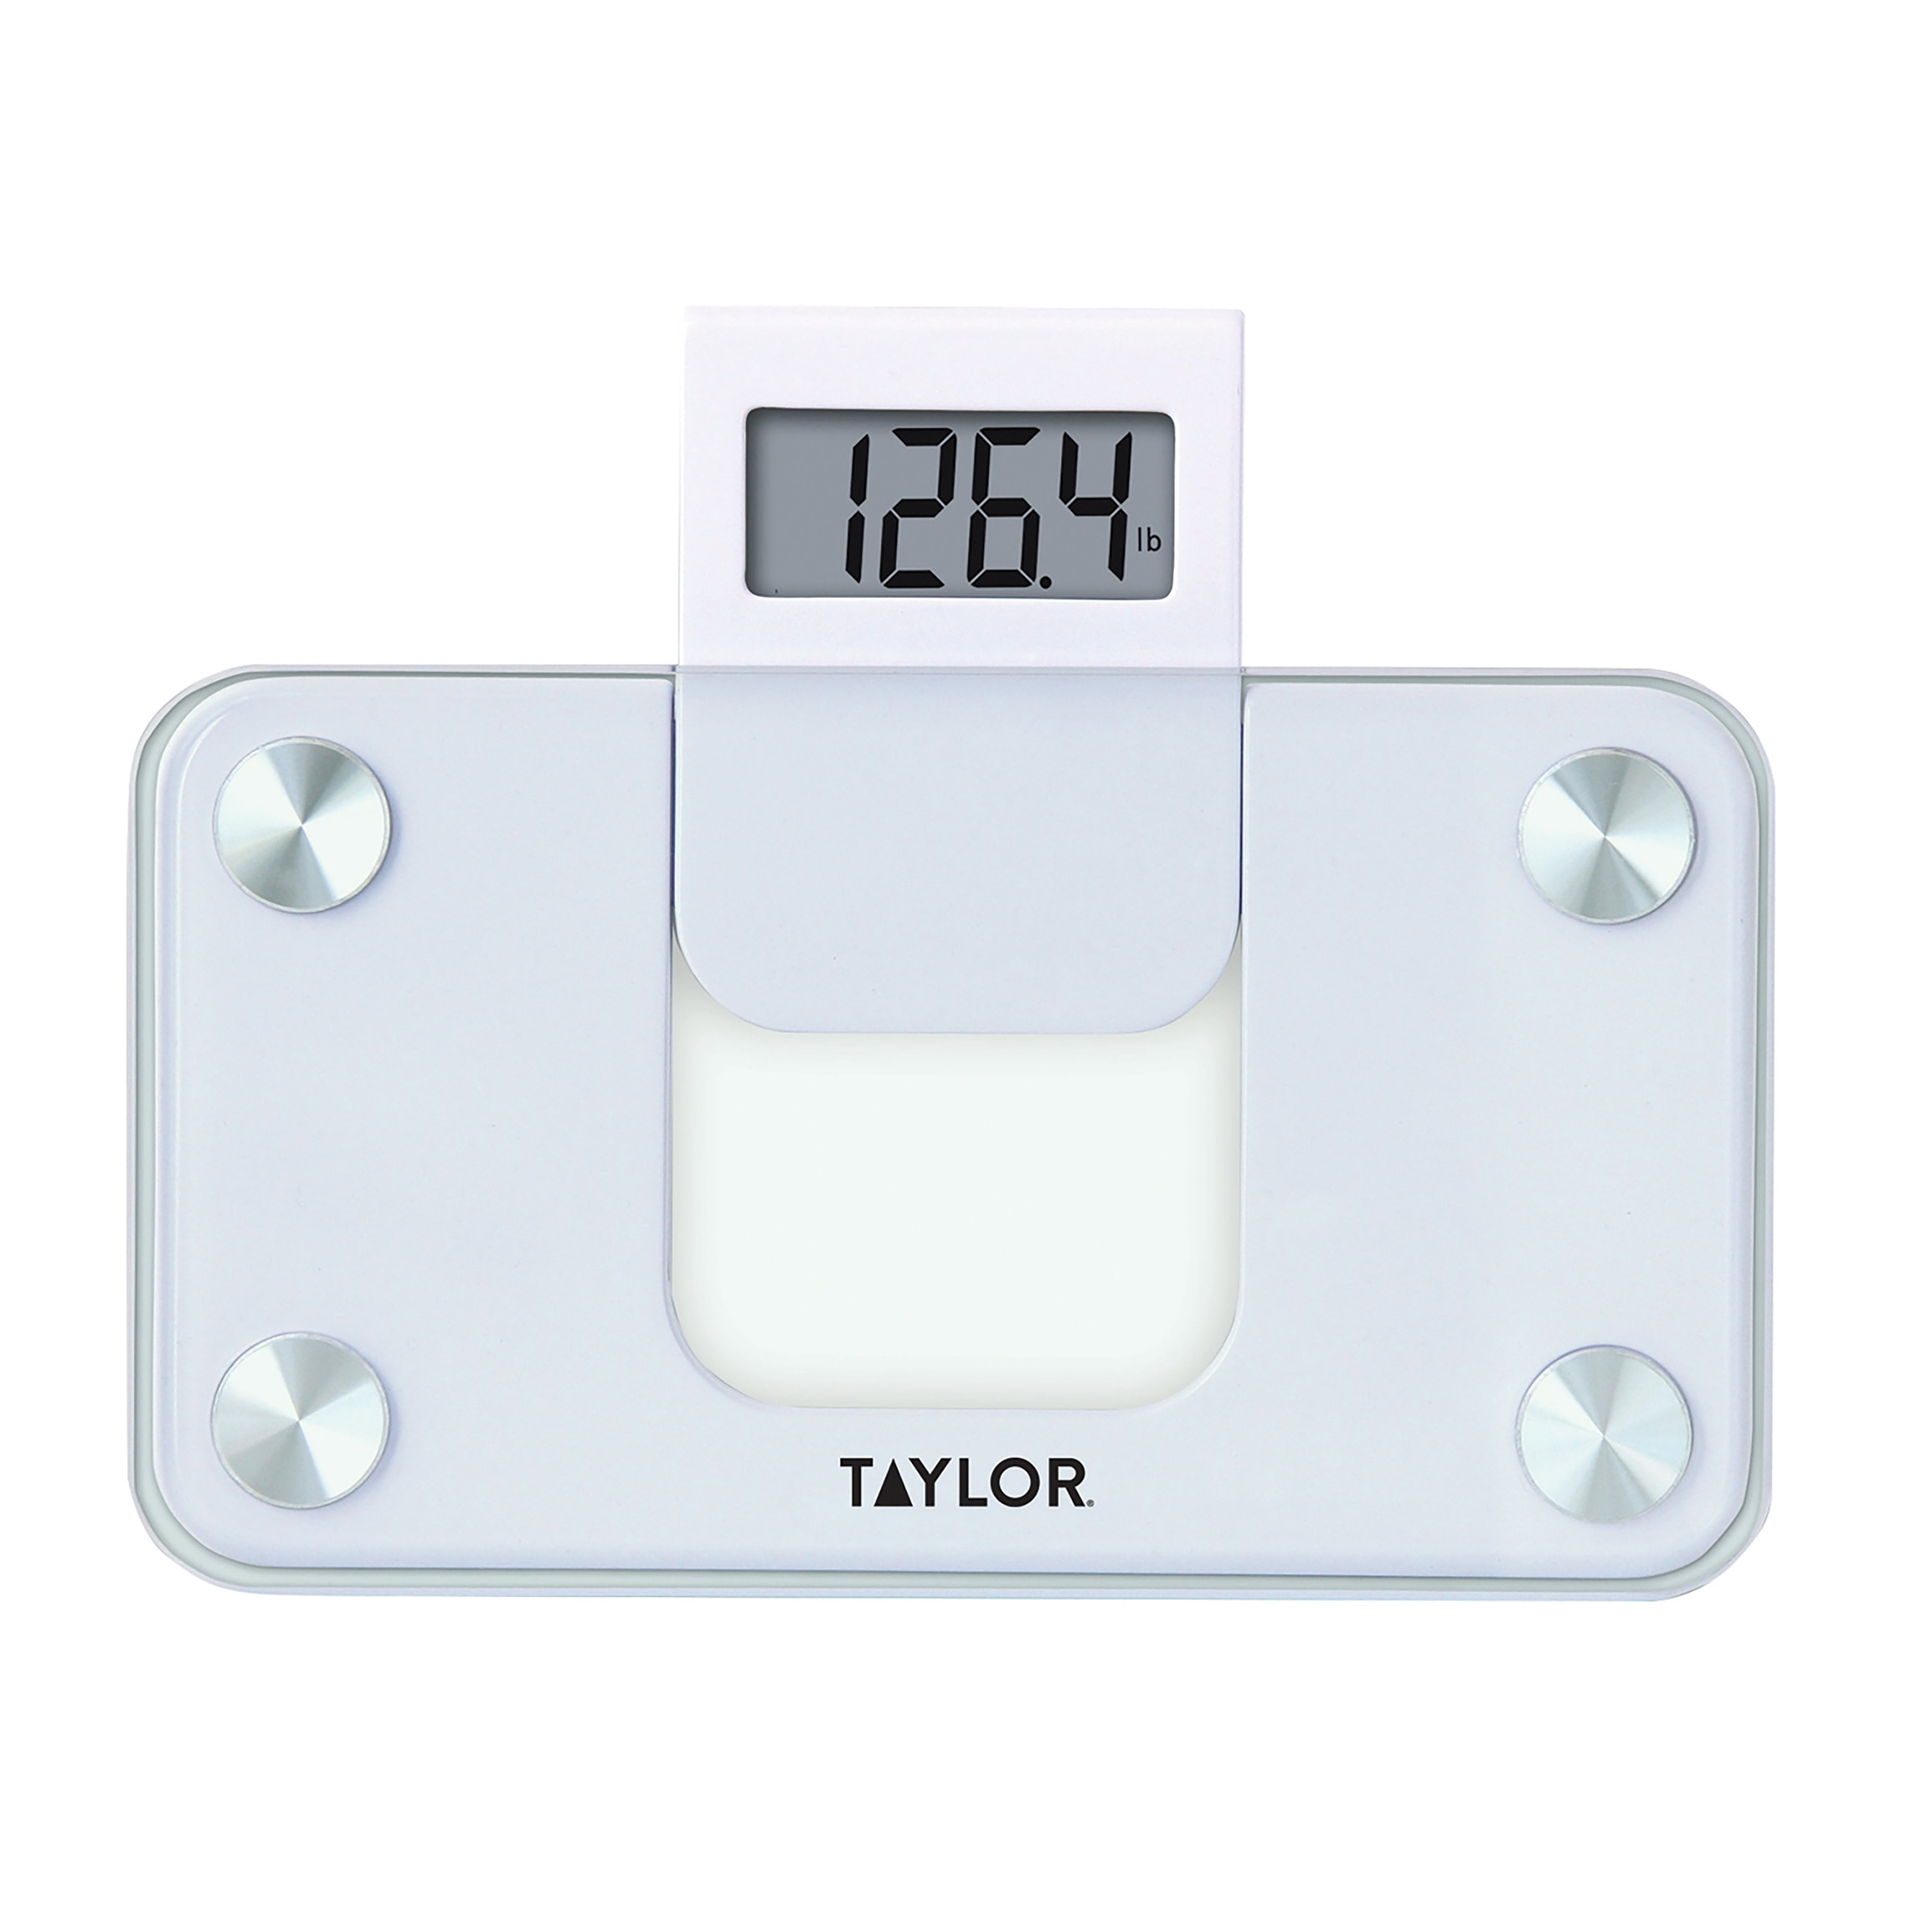 Taylor Digital Glass Bathroom Scale for Body Weight, Large Durable  Platform, Extra High 500 lb Capacity, Large 3.5x1.7 White Backlit  Display, Sea